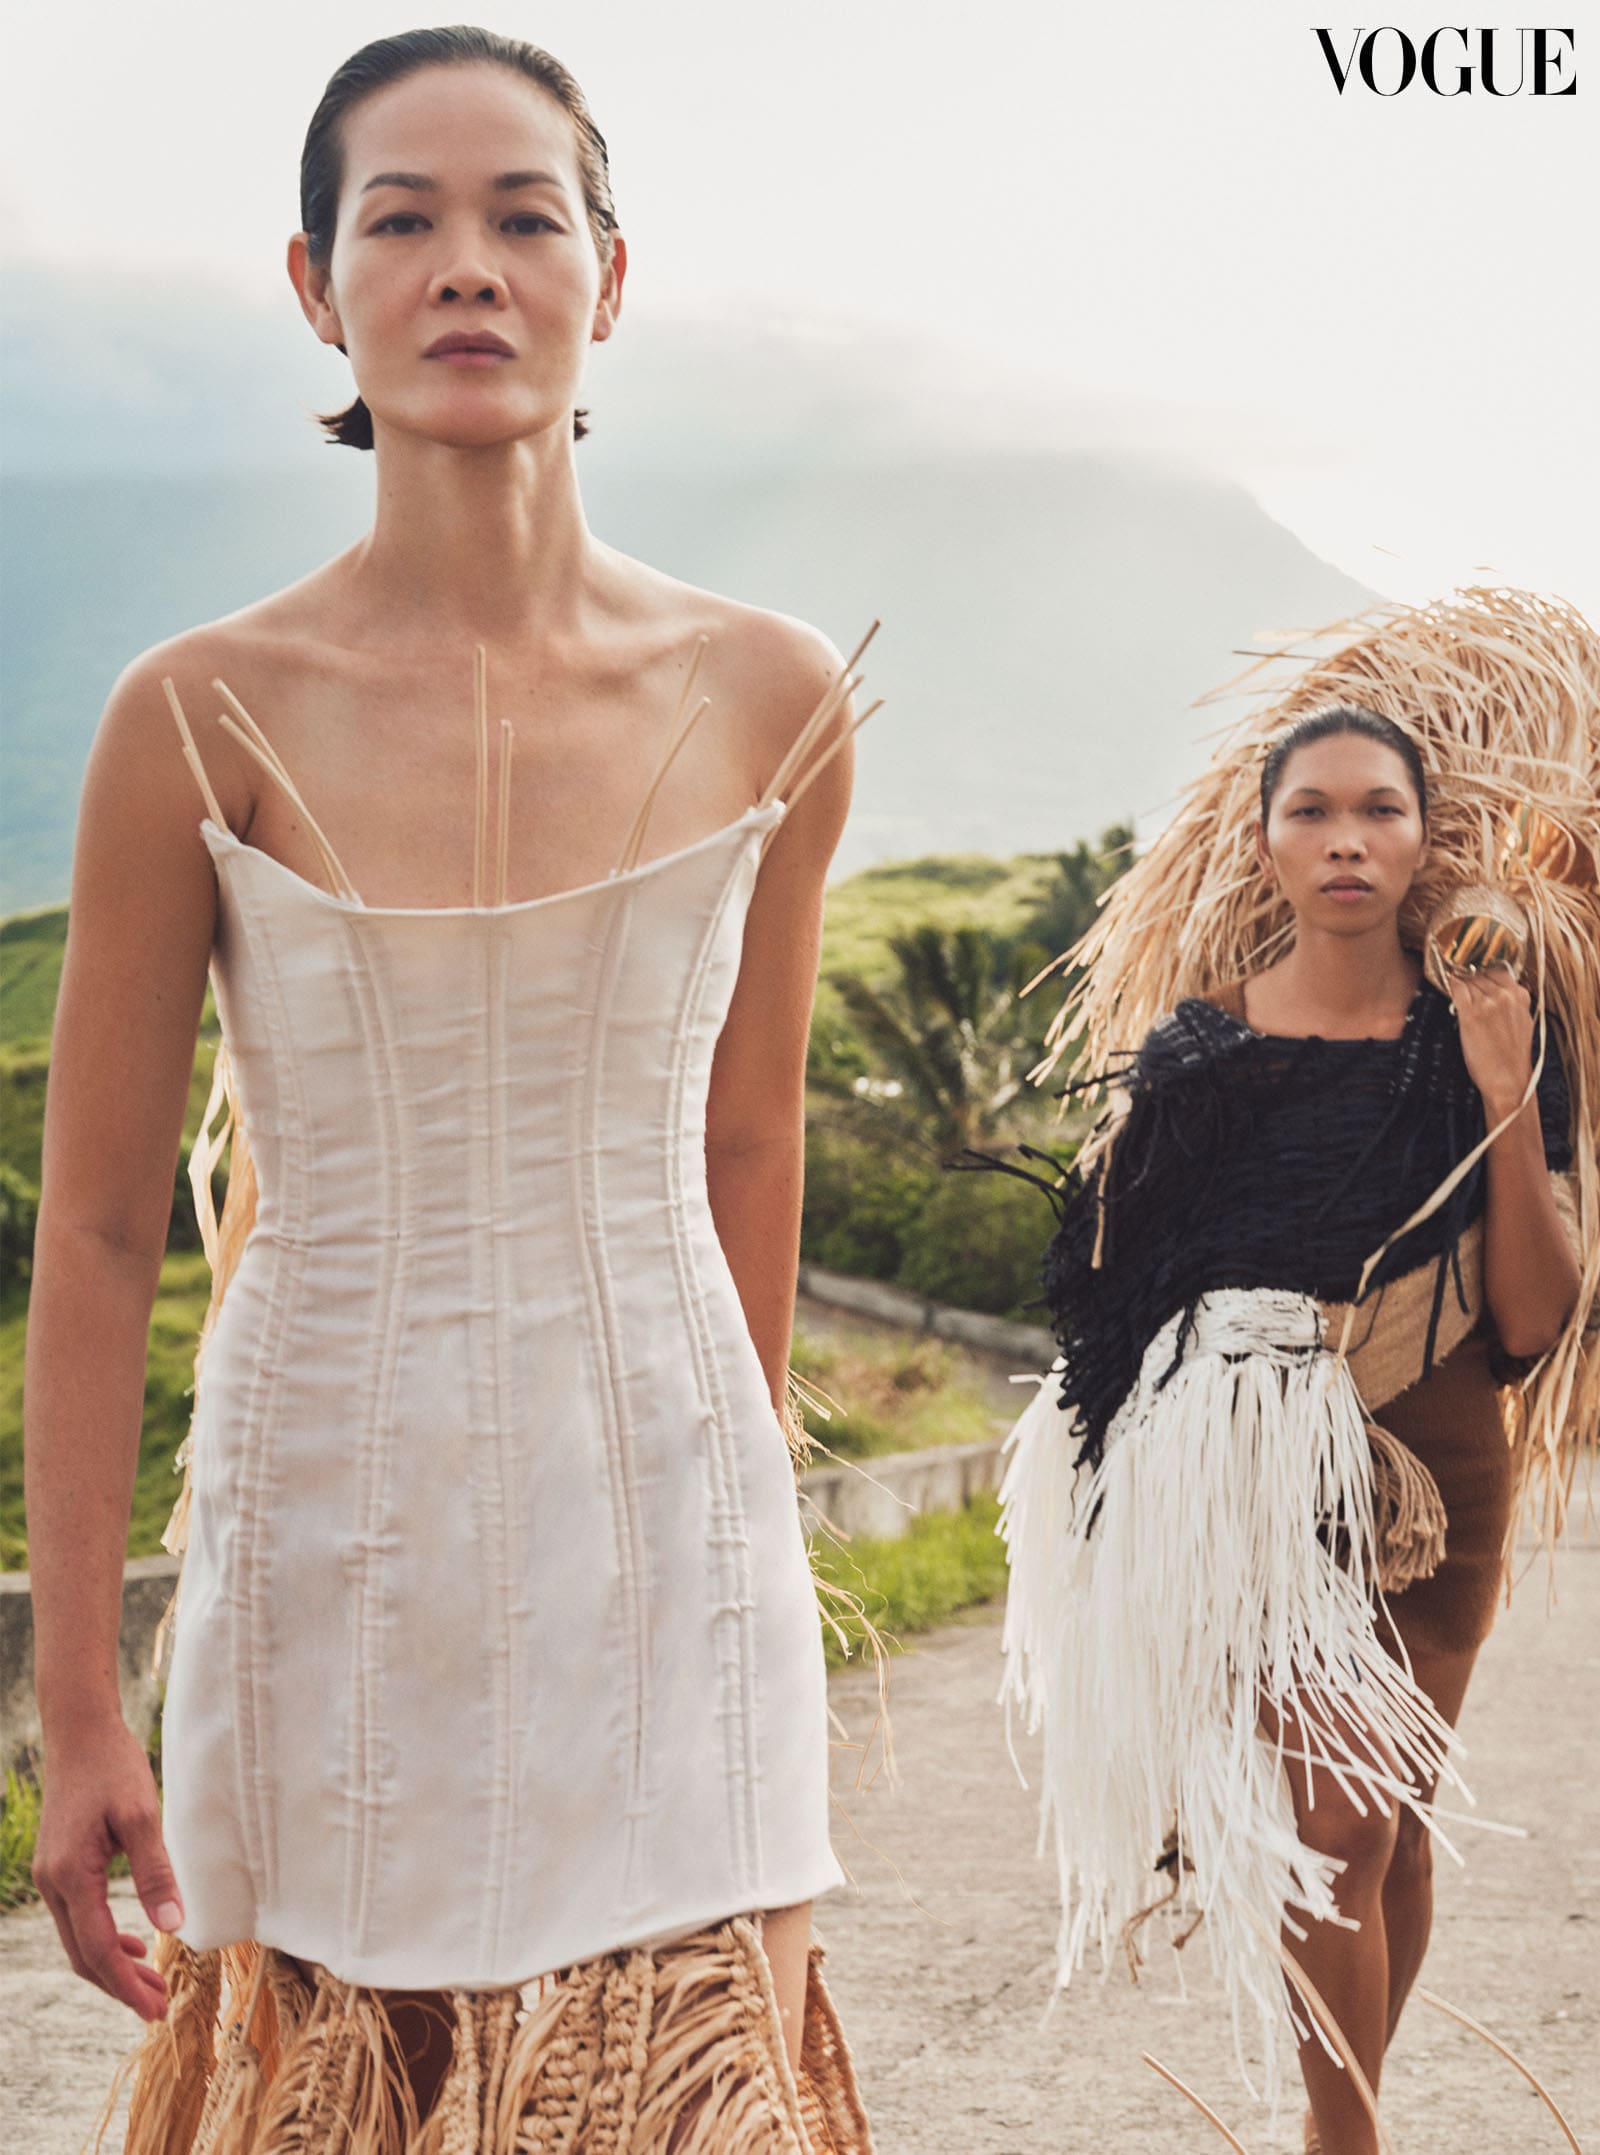 Jo Ann wears the Tree Altar Look by RACHEL MIN LEE, featuring a corset dress embellished with raffia weavings. Lukresia wears the Weaver Look by RACHEL MIN LEE, which embraces the art of handwoven looms and deconstructed silhouettes.